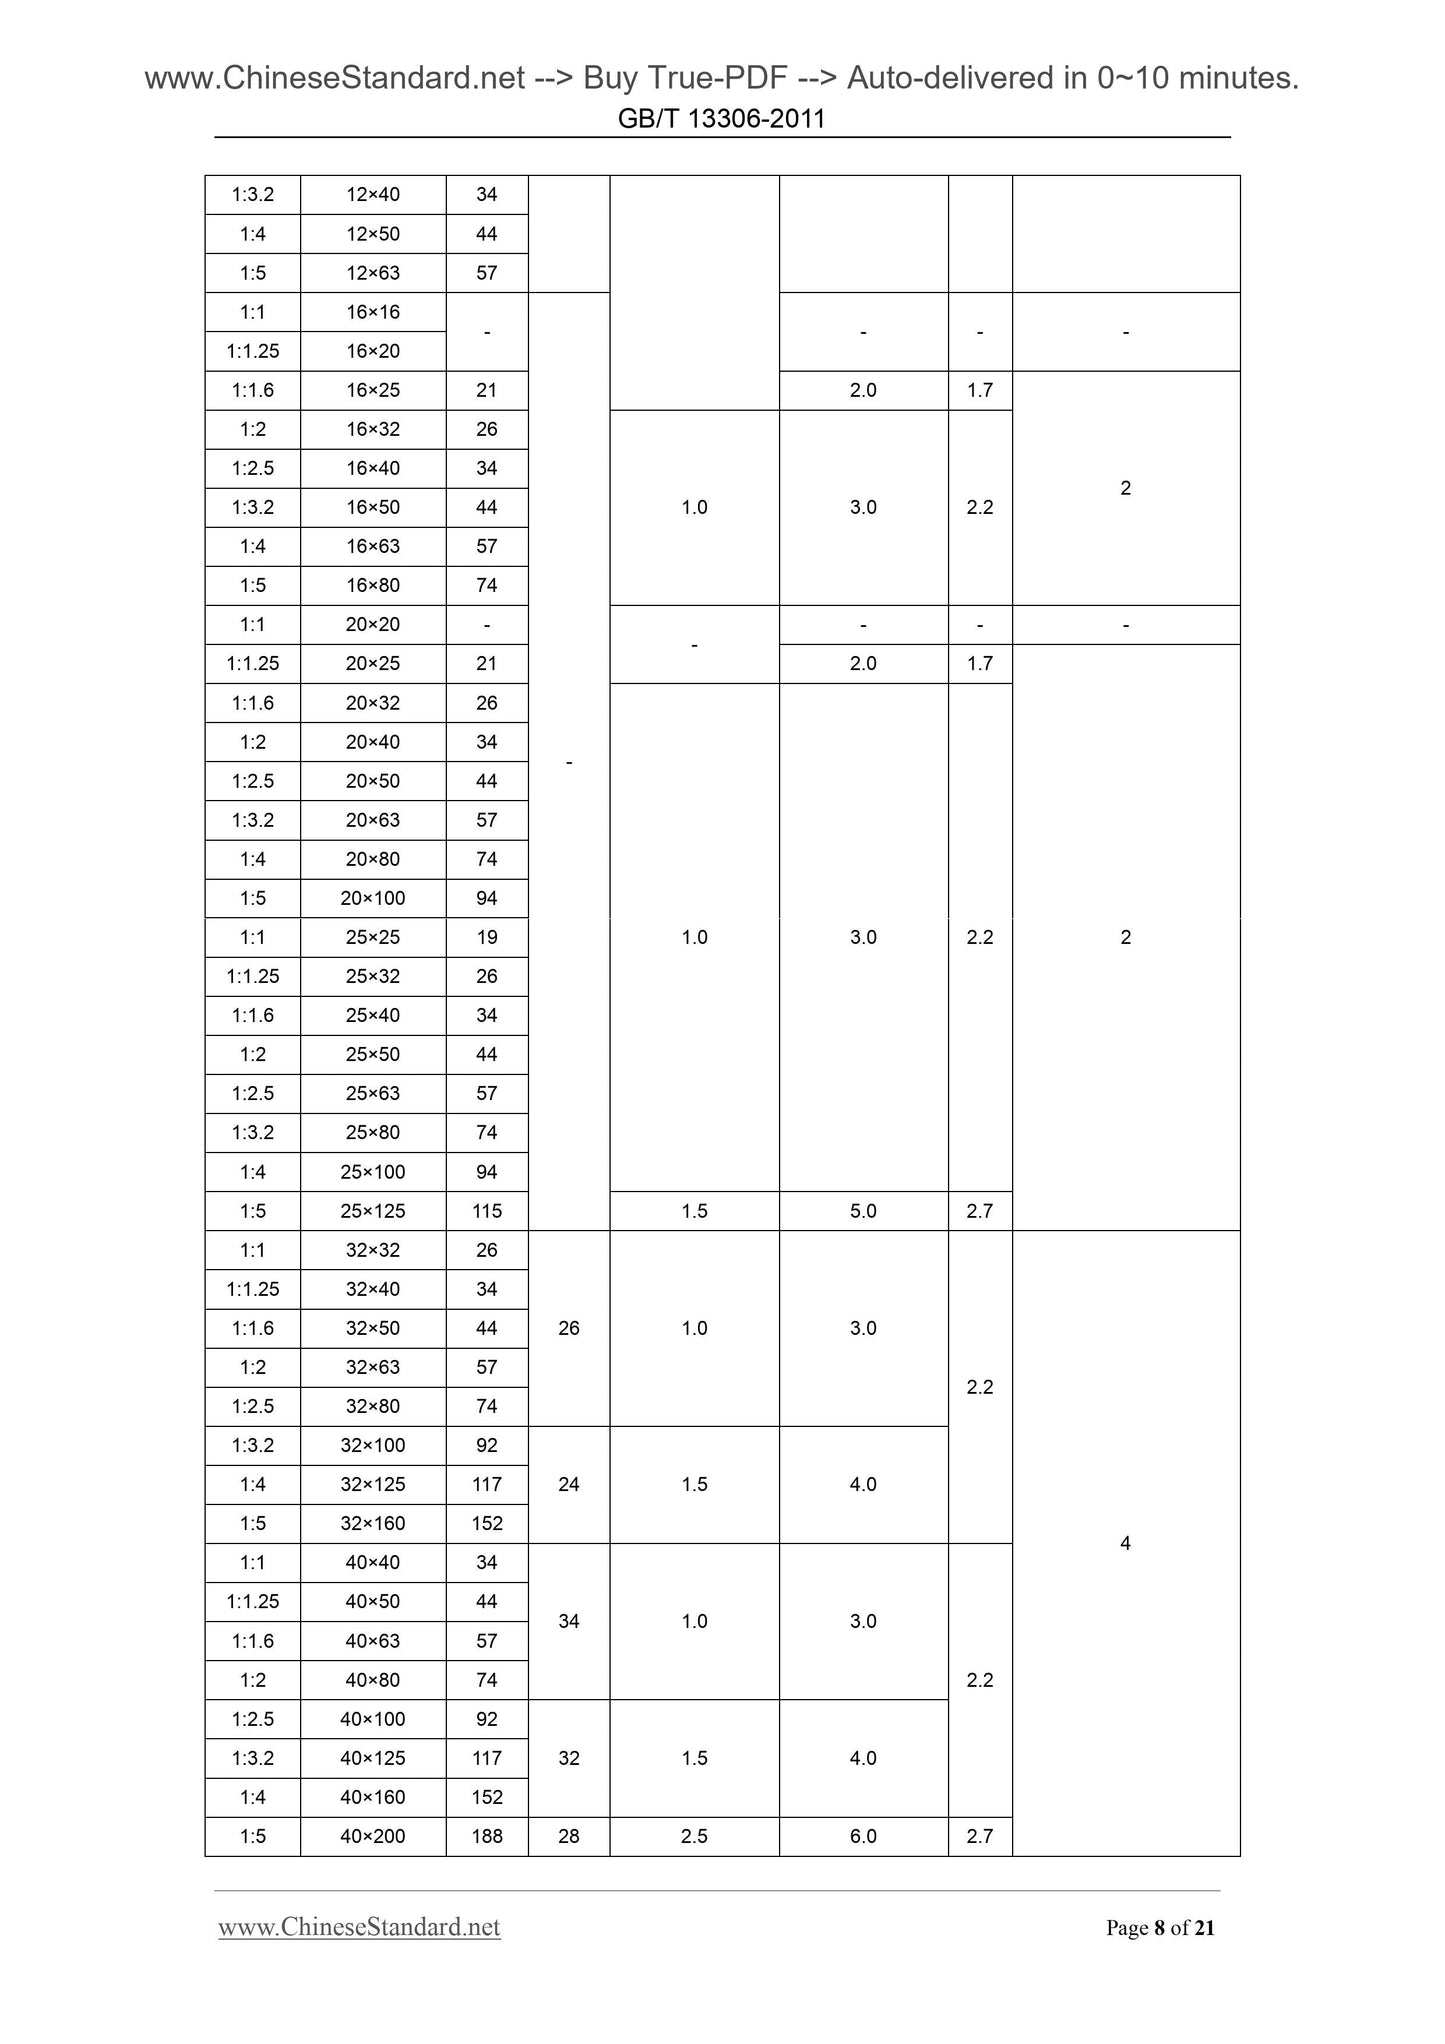 GB/T 13306-2011 Page 5